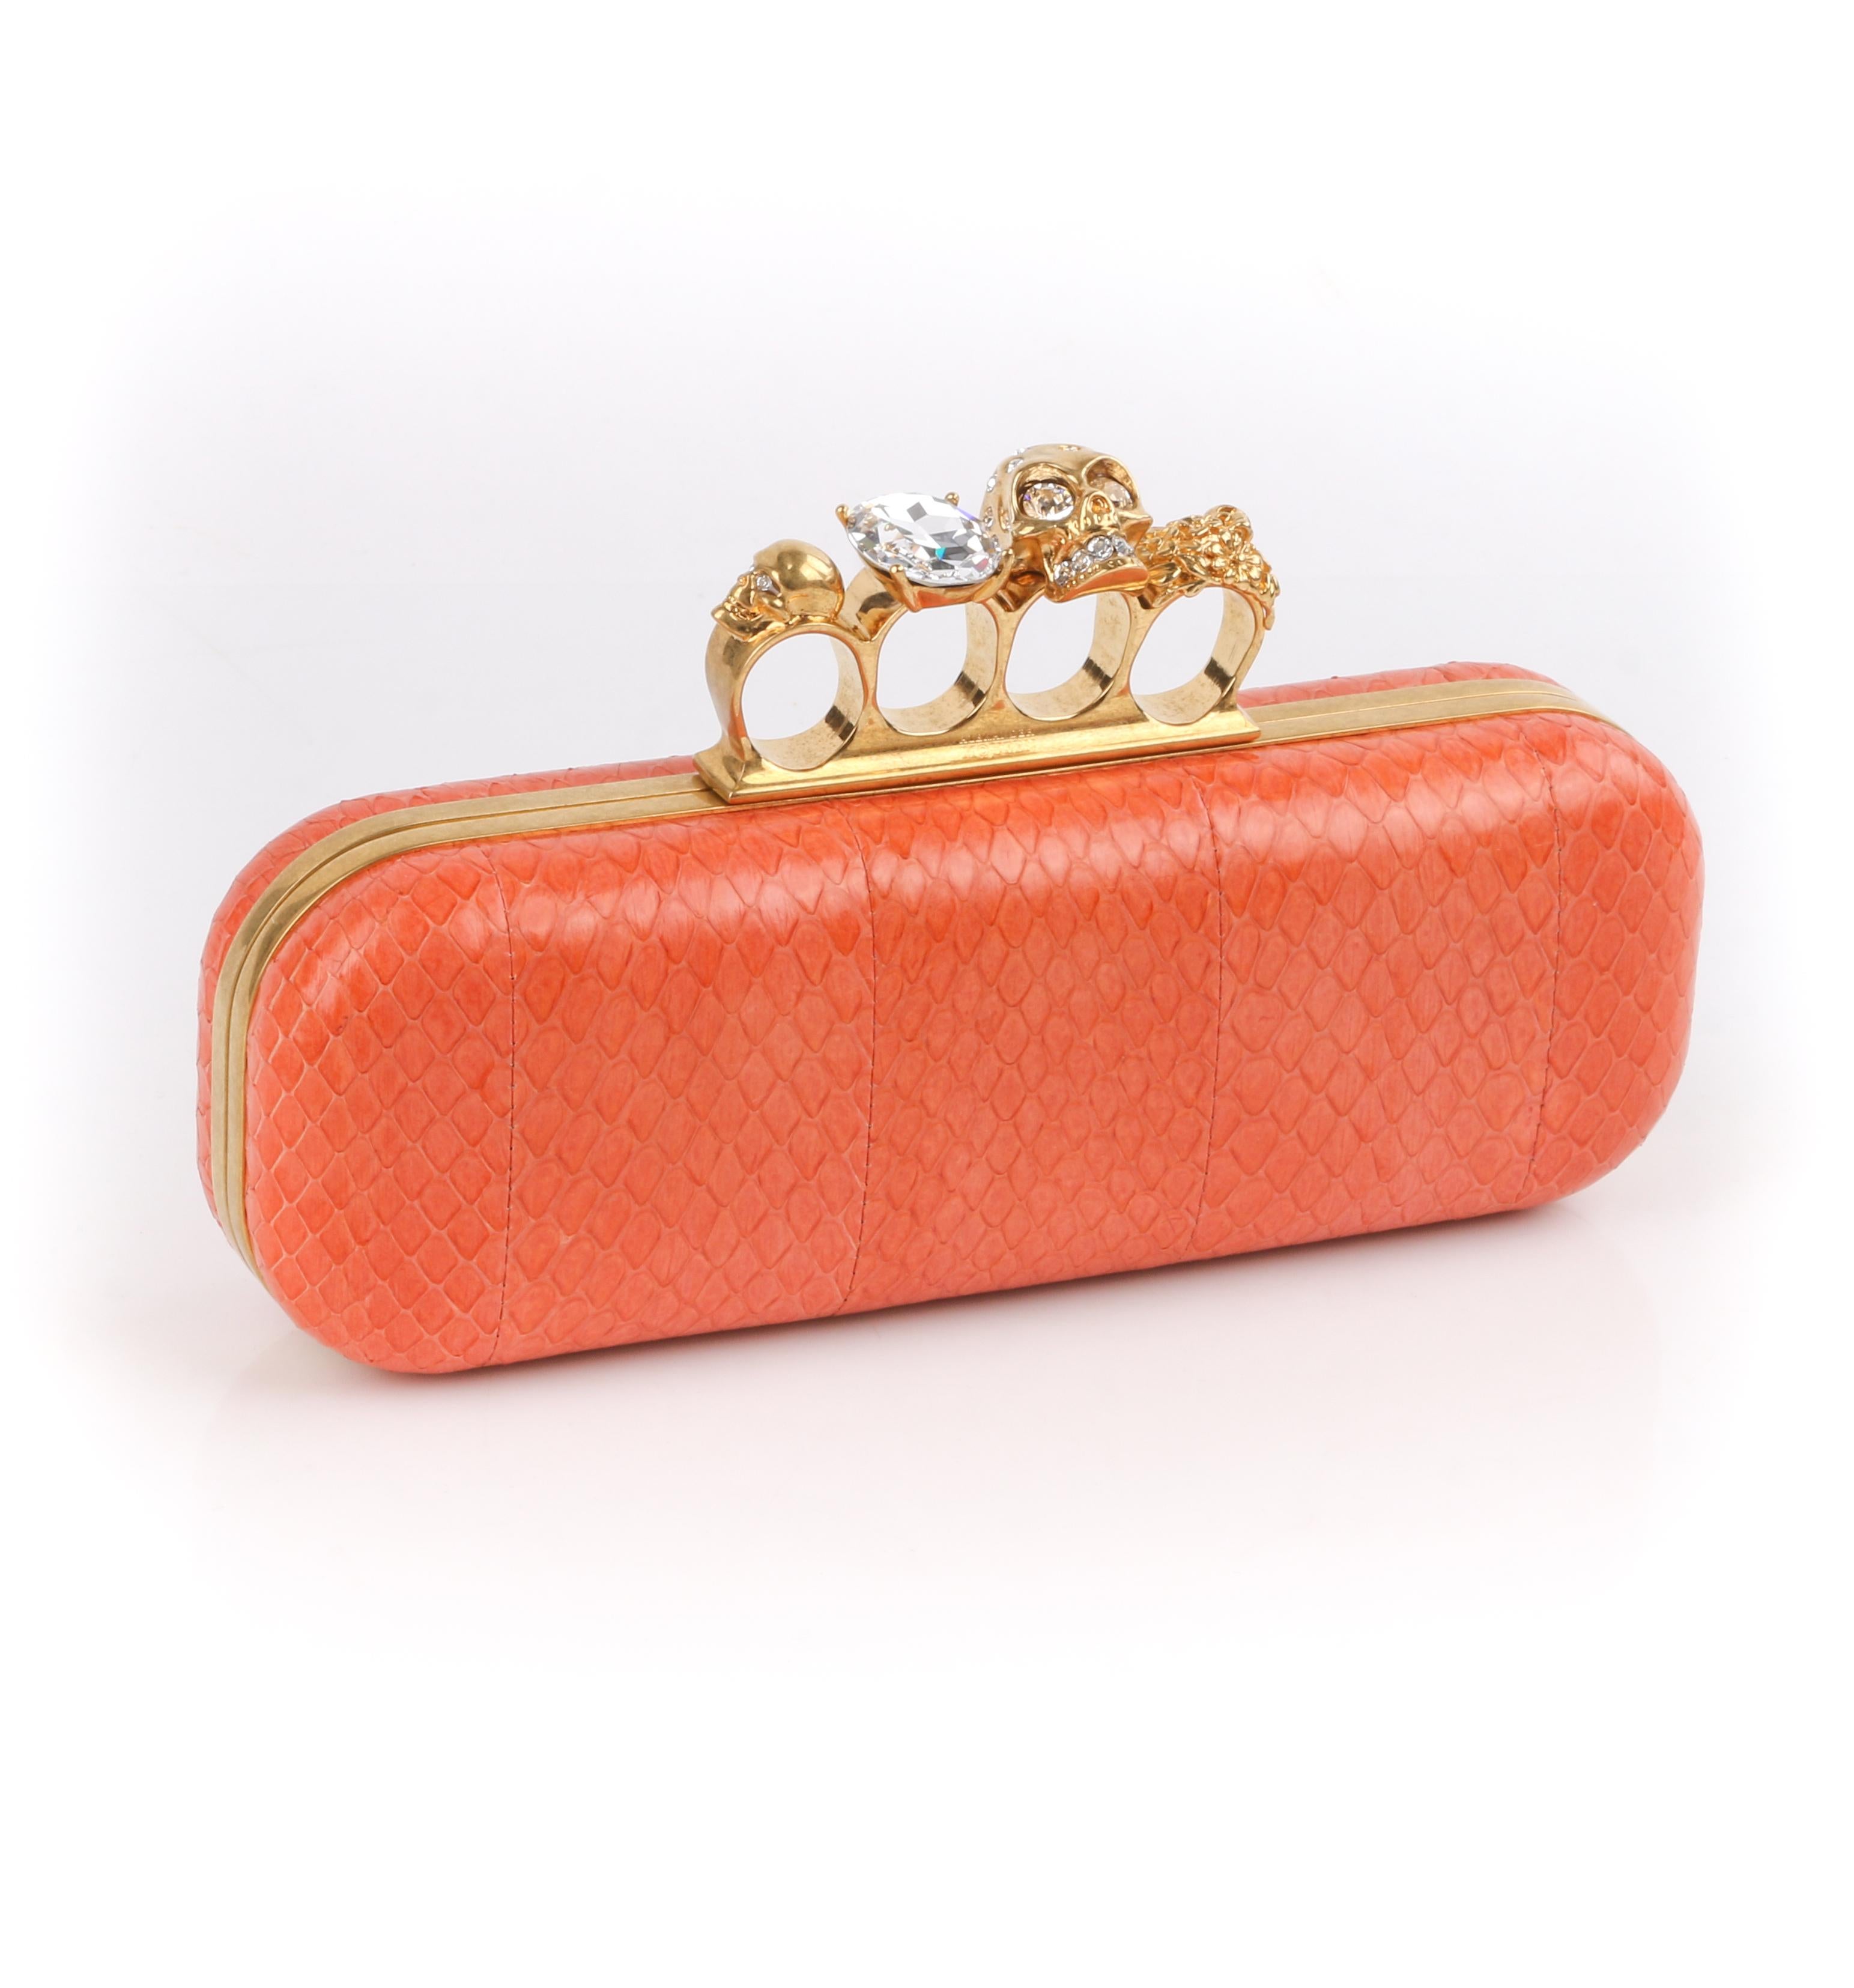 DESCRIPTION: ALEXANDER McQUEEN Coral Python Skull Crystal Knuckle Duster Box Clutch 
 
Estimated Retail: $2,545
 
Brand / Manufacturer: Alexander McQueen 
Style: Clutch
Color(s): Orange
Lined: Yes
Unmarked Fabric Content: Python snakeskin, leather,